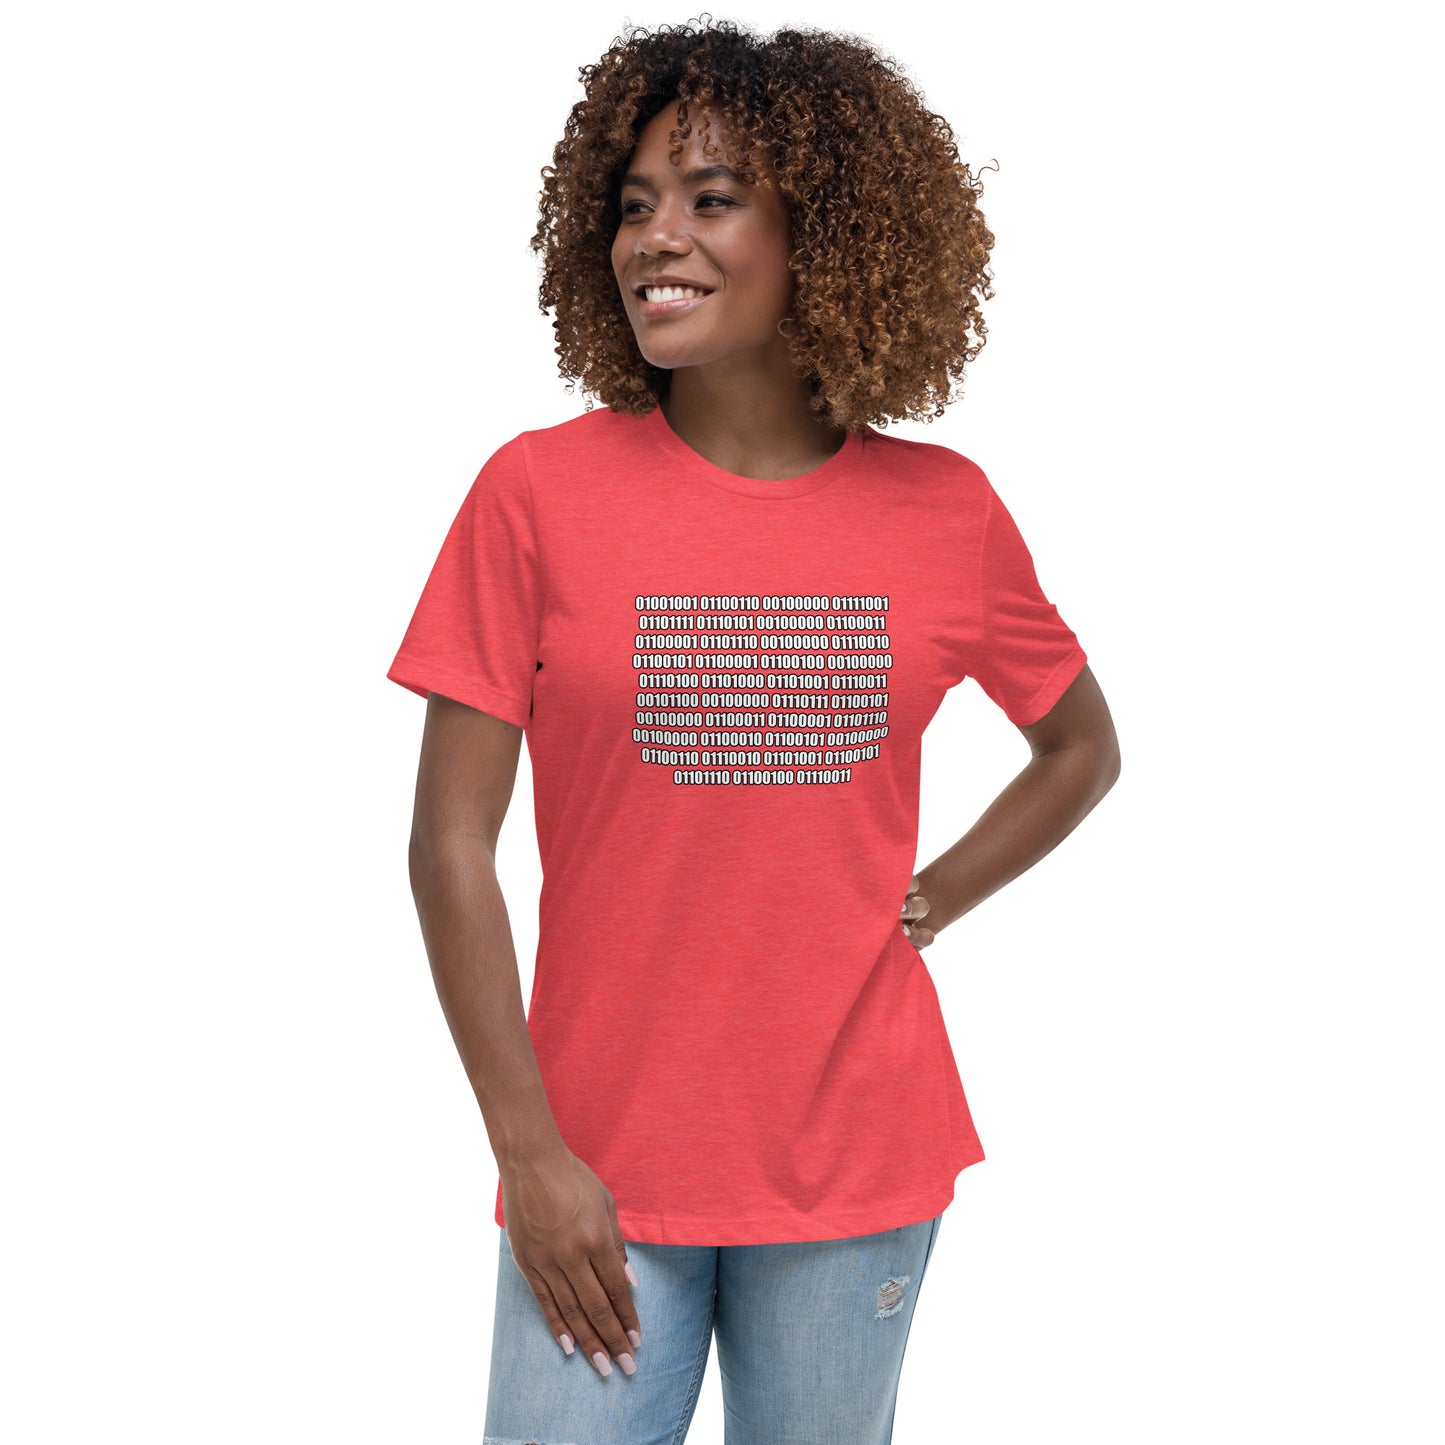 Woman with red t-shirt with binary code "If you can read this"